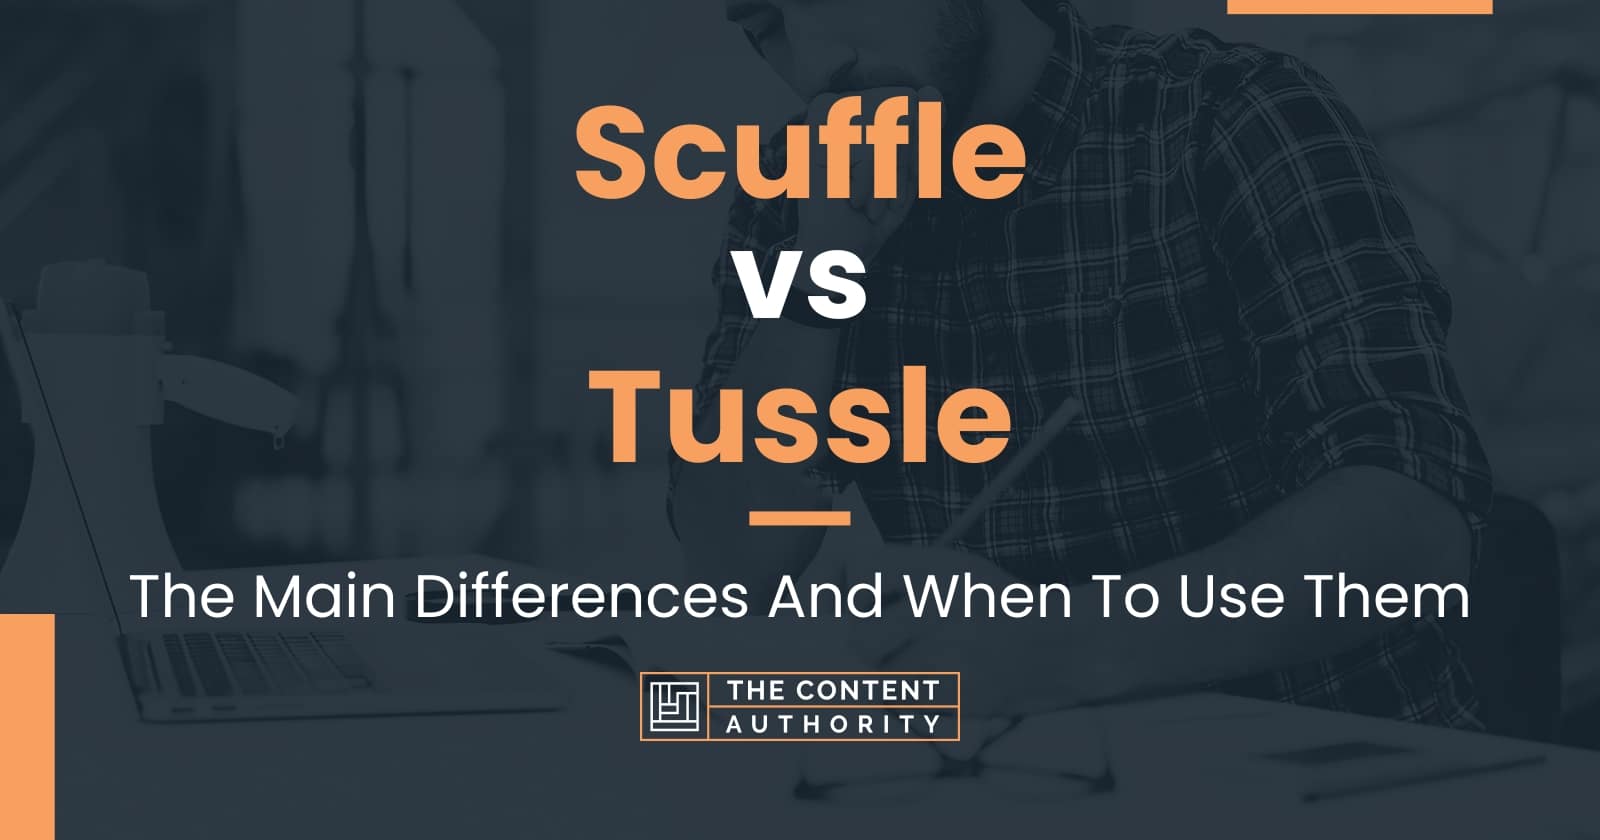 Scuffle vs Tussle: The Main Differences And When To Use Them